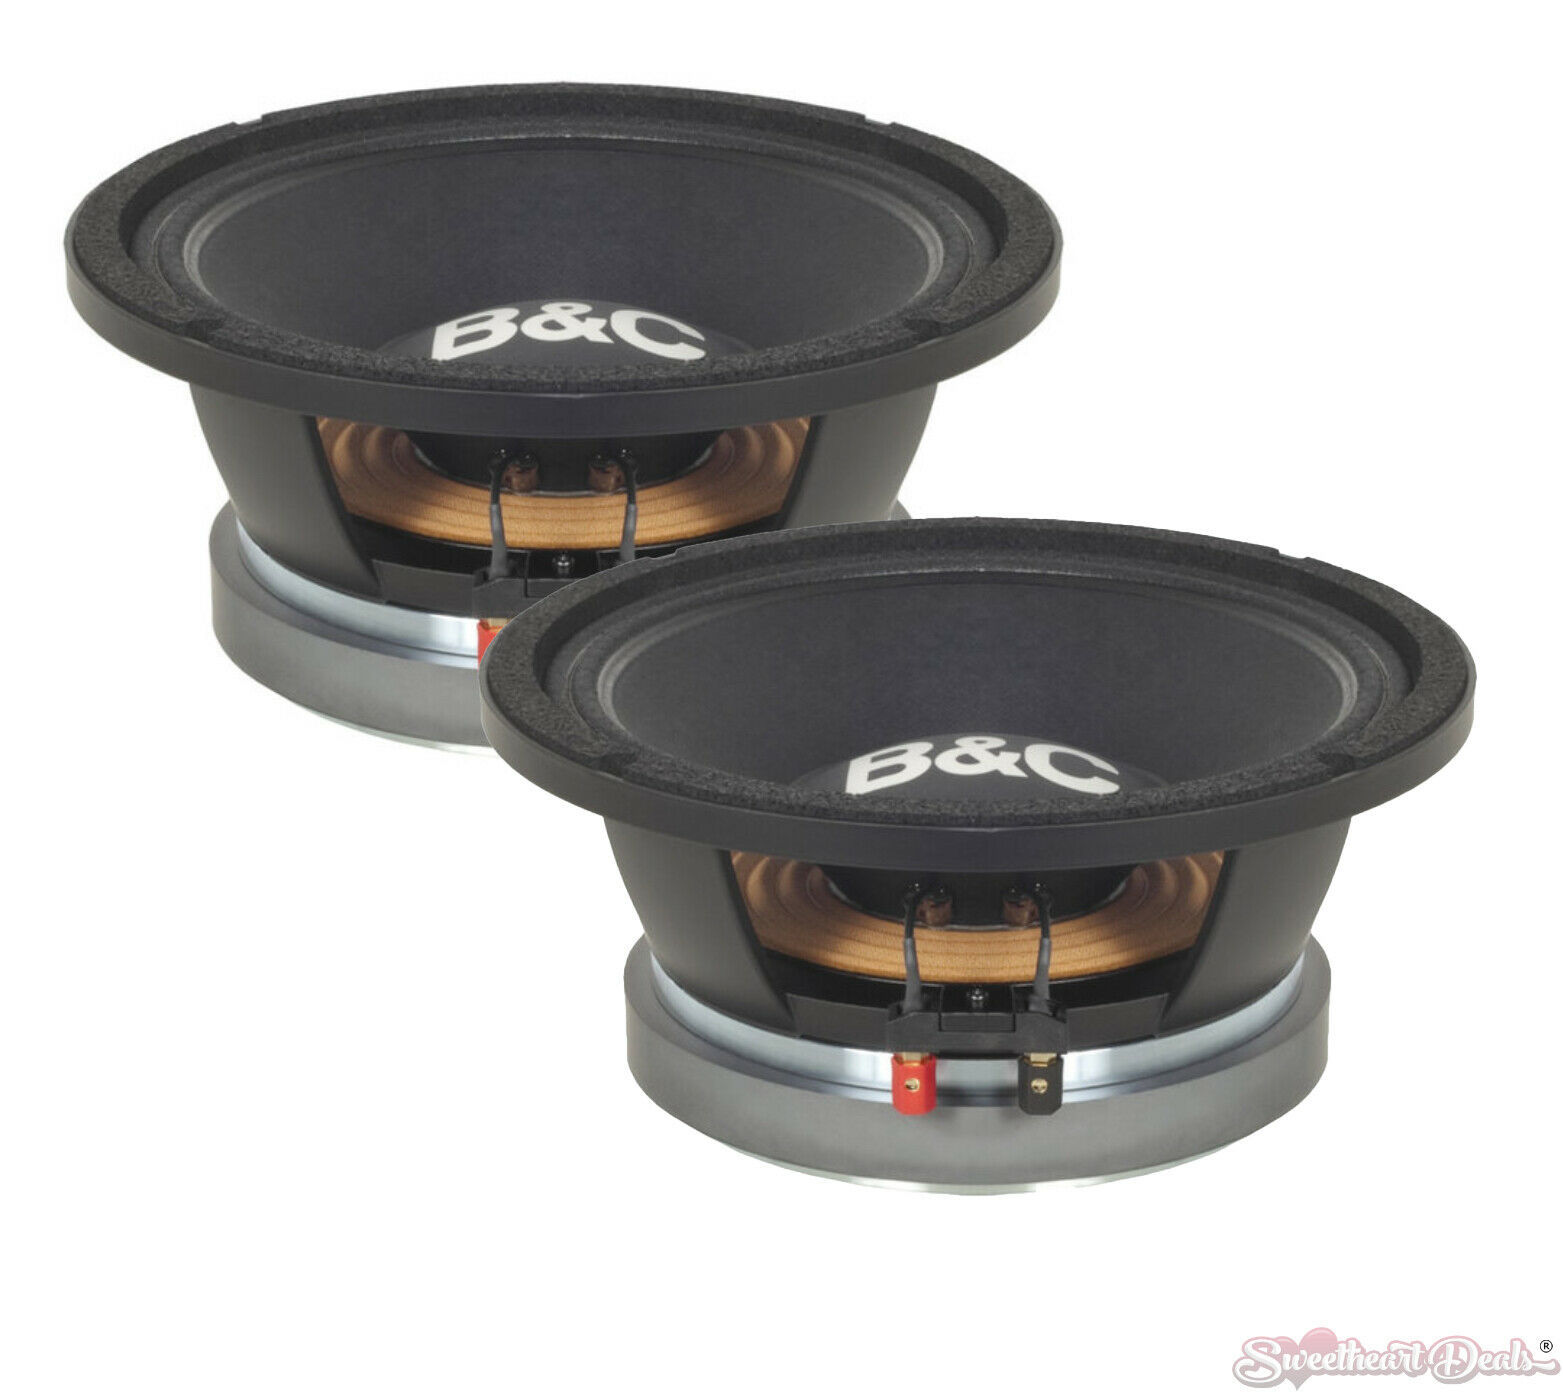 B&C 10MD555 10-in 8 Ohms 700W Super High Power Woofer with Large Magnet - Pair